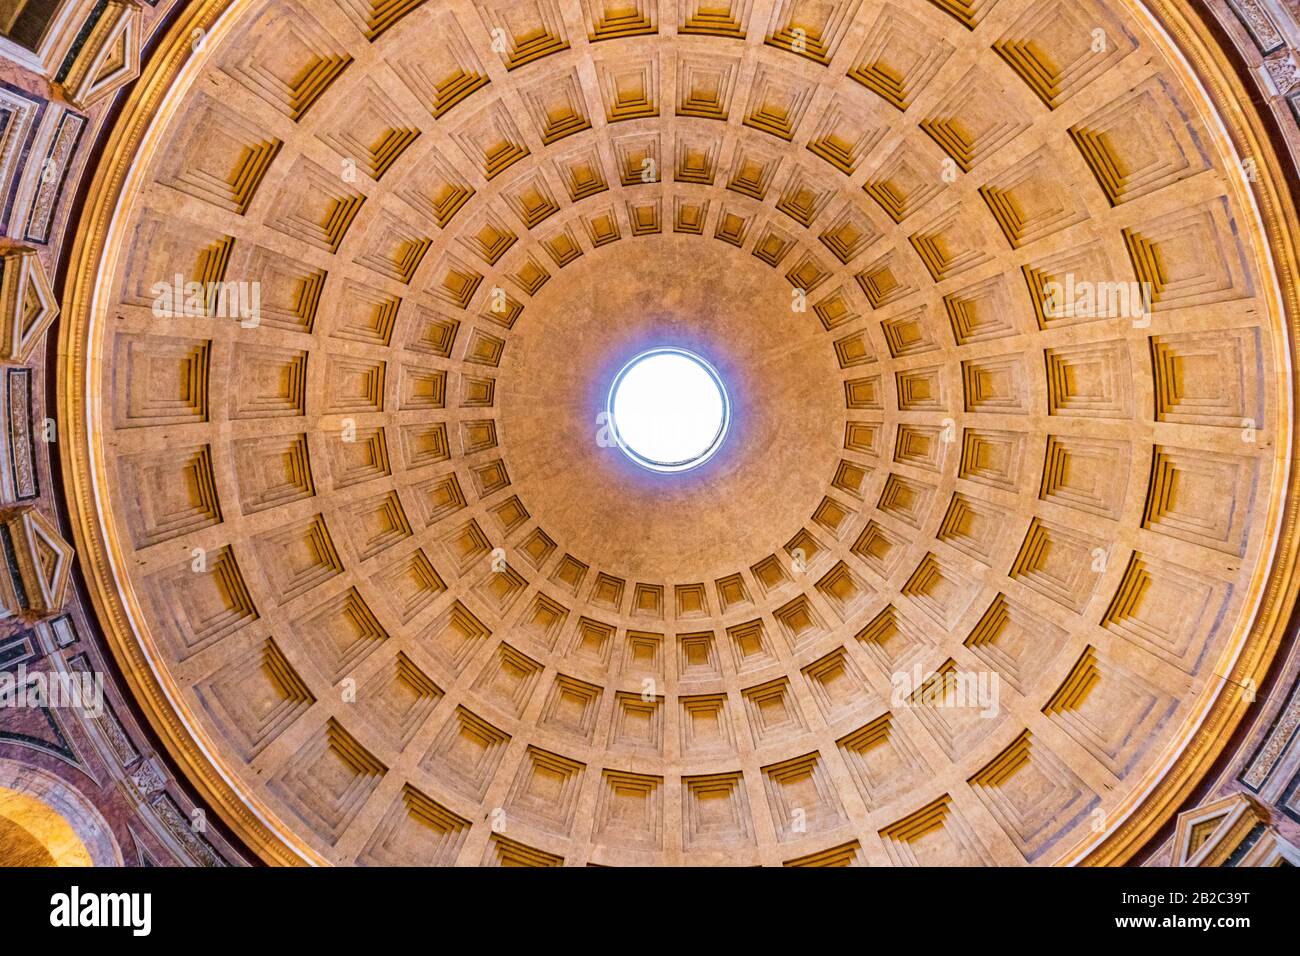 Rome, Italy - October 02 2018: The Panthenon, a former Roman Temple is now a Catholic church. One of the highest domed buildings. Stock Photo